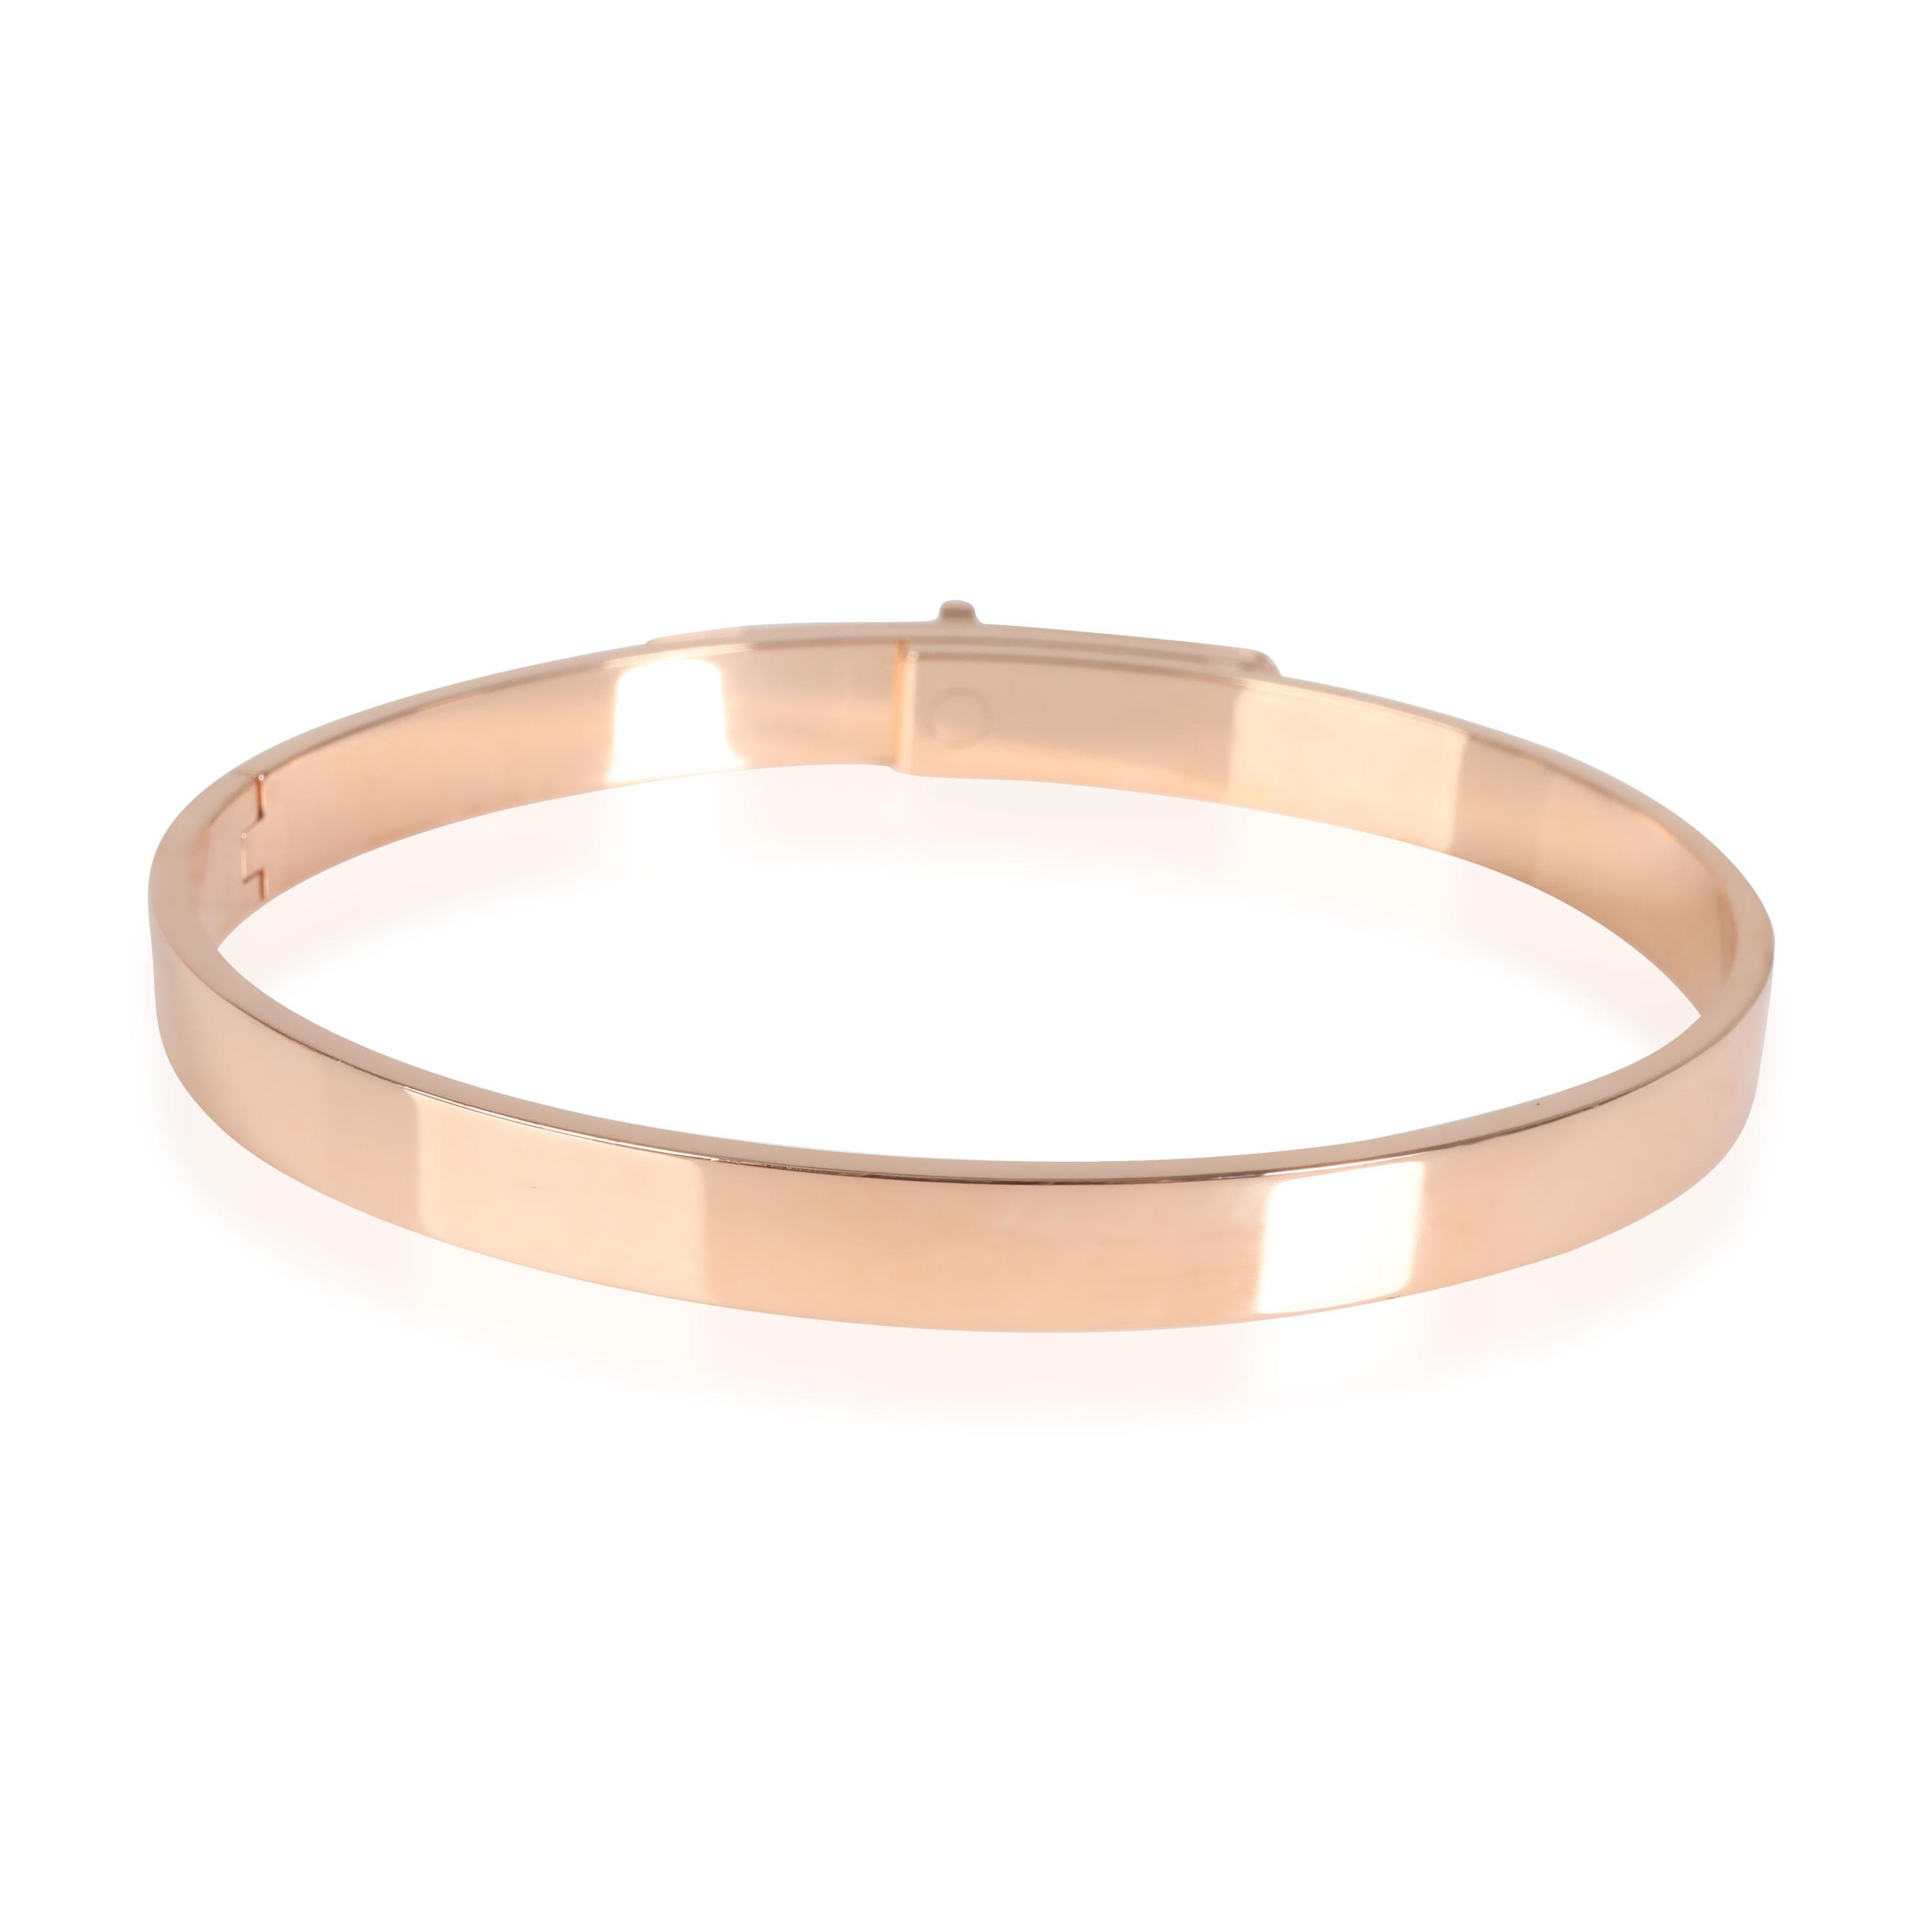 Hermès Kelly Diamond Bracelet in 18k Rose Gold 0.33 CTW

PRIMARY DETAILS
SKU: 116009
Listing Title: Hermès Kelly Diamond Bracelet in 18k Rose Gold 0.33 CTW
Condition Description: Retails for 14,400 USD. In excellent condition and recently polished.